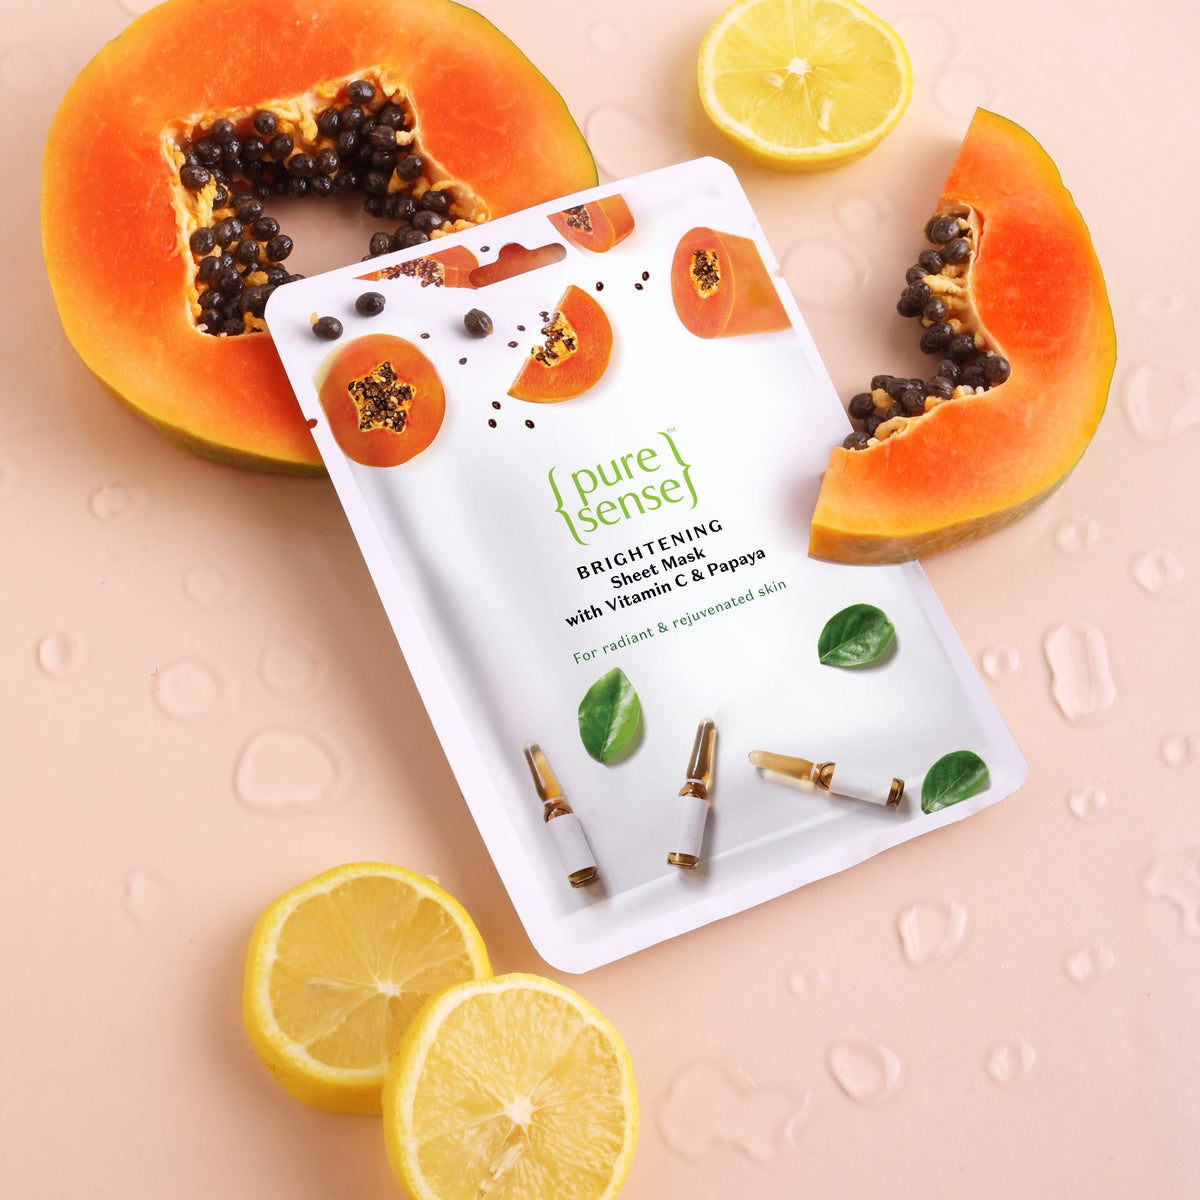 [CRED] Brightening Sheet Mask with Vitamin C & Papaya | From the makers of Parachute Advansed | 15ml